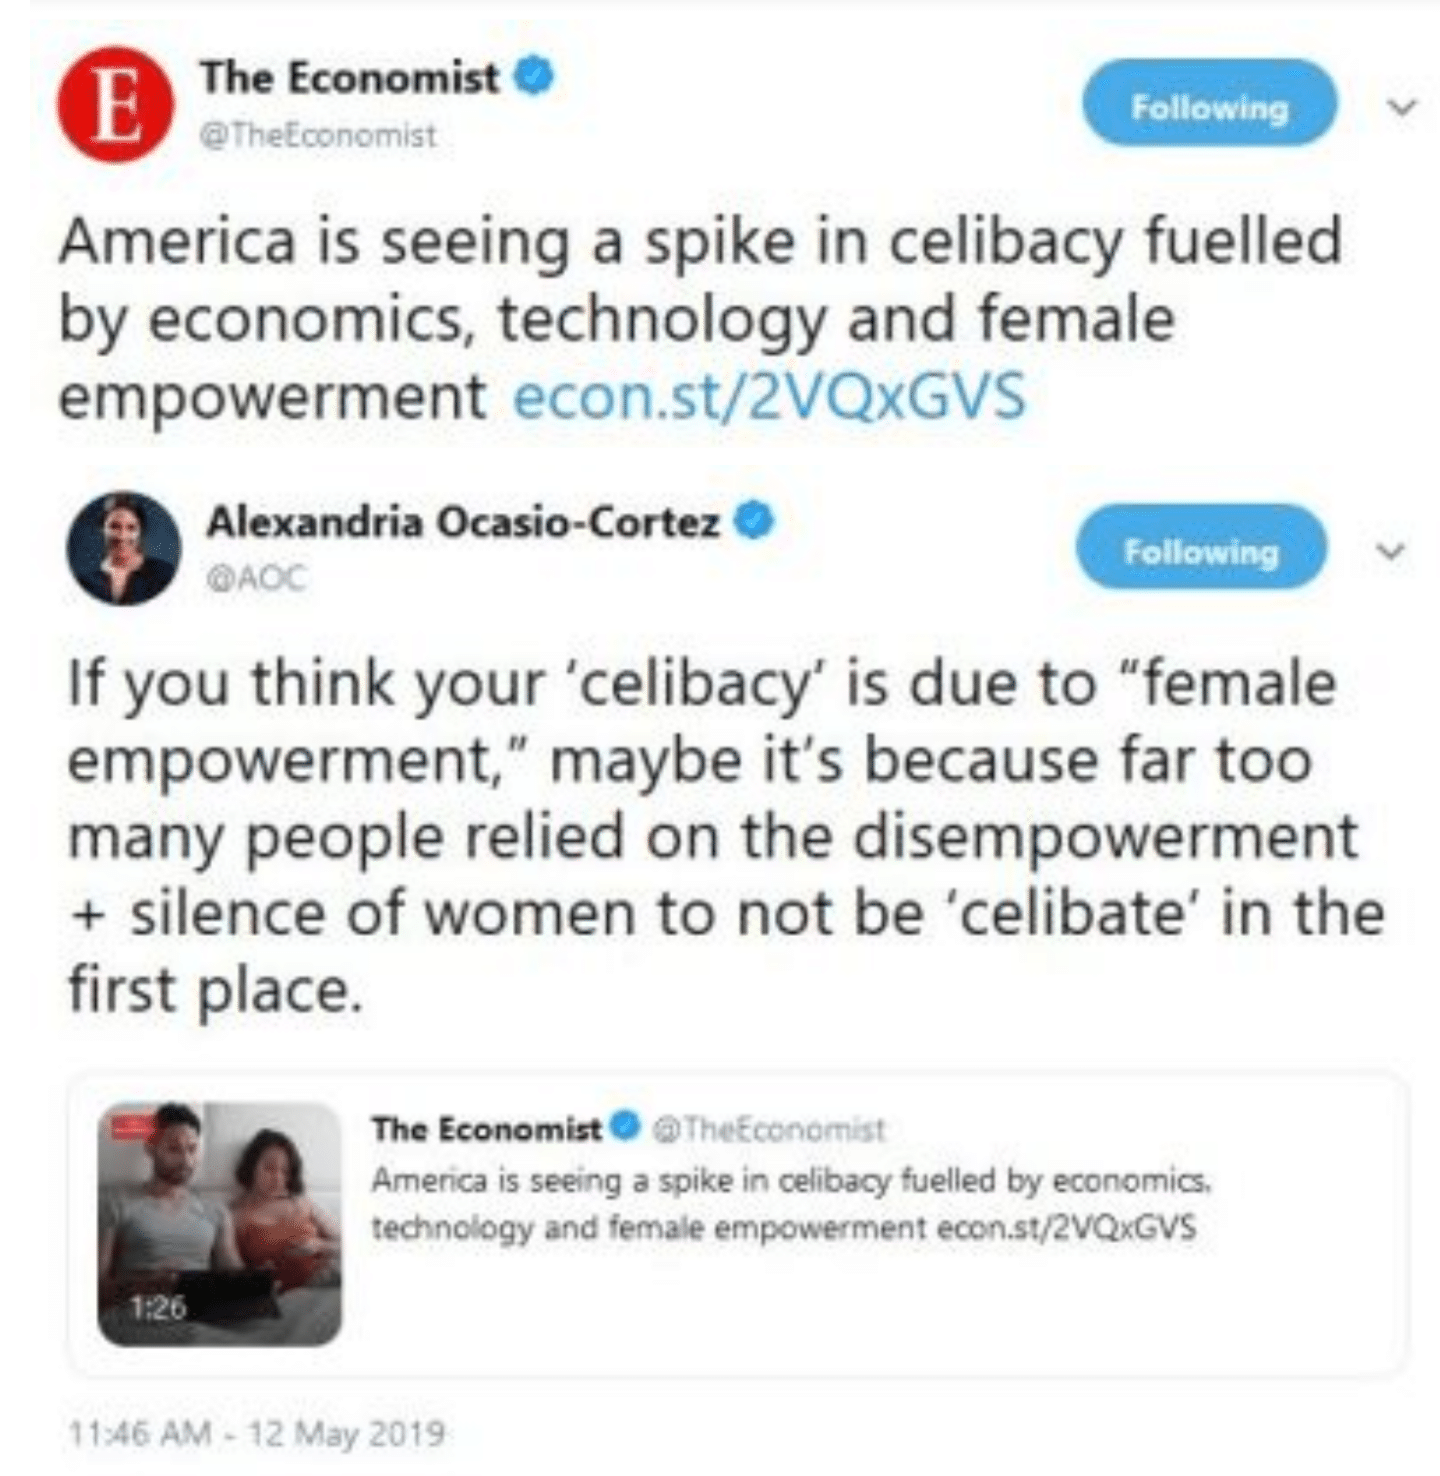 women feminine-memes women text: The Economist O Following @thetconomjst America is seeing a spike in celibacy fuelled by economics, technology and female empowerment econ.st/2VQxGVS Alexandria Ocasio-Cortez O Following If you think your 'celibacy' is due to 